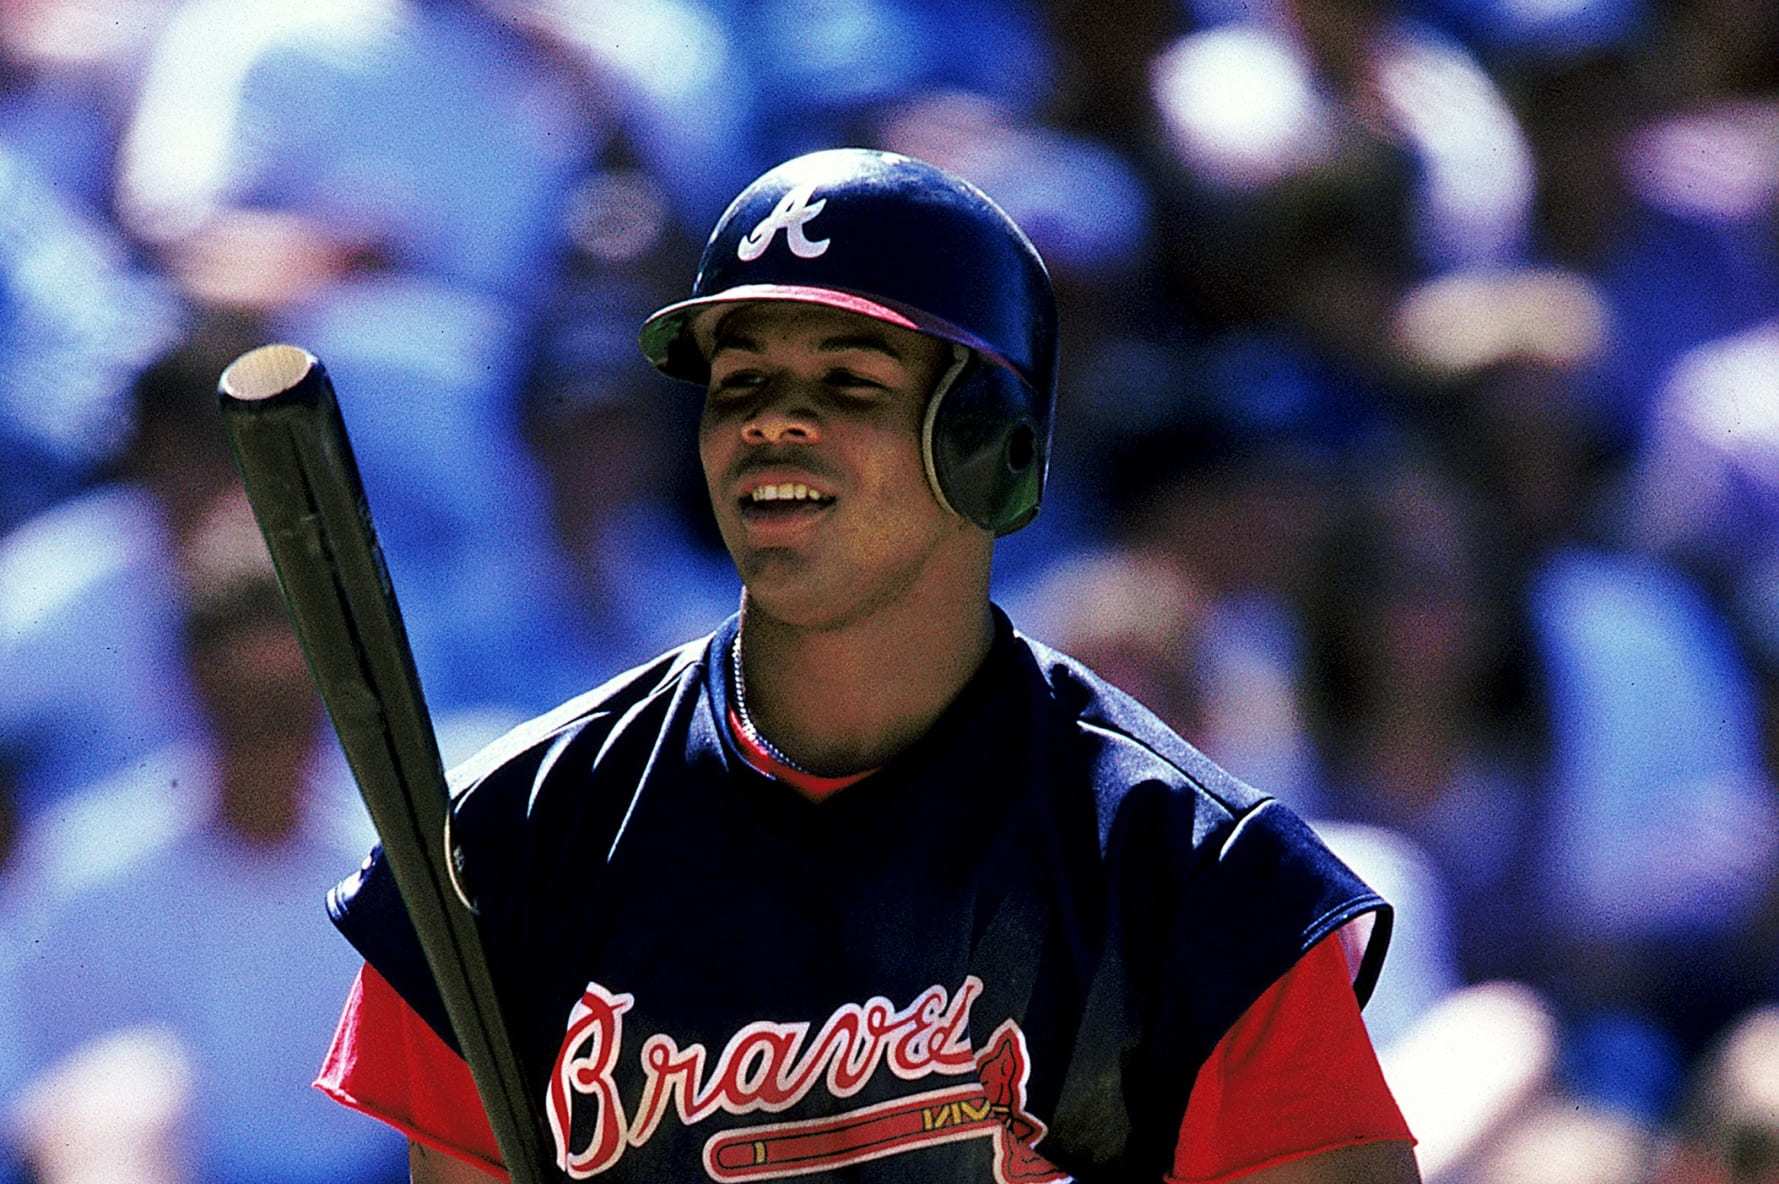 Ken Griffey Jr. to enter the Hall of Fame as all-time great center fielder  despite strange career arc - Beyond the Box Score